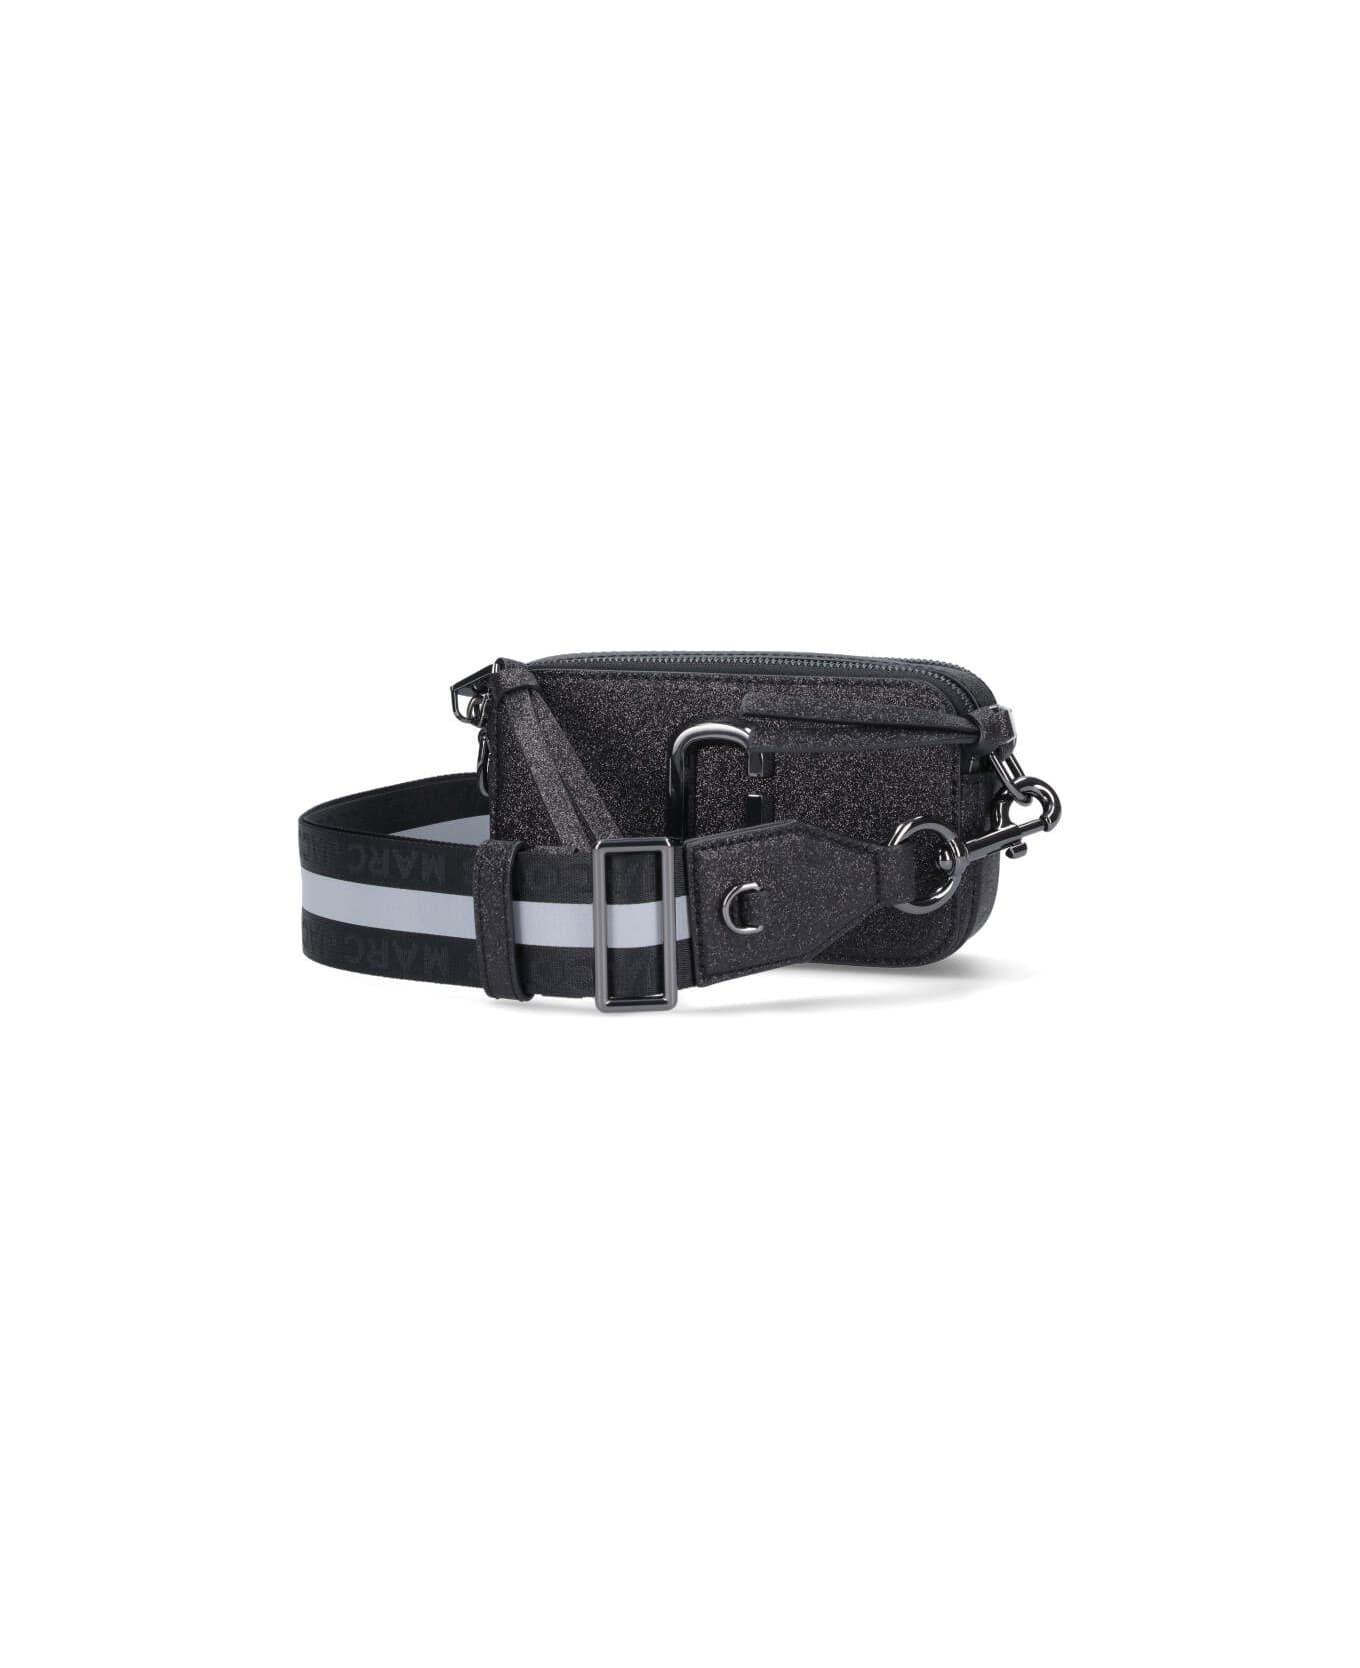 Marc Jacobs The Snapshot Leather Camera Bag - black ショルダーバッグ